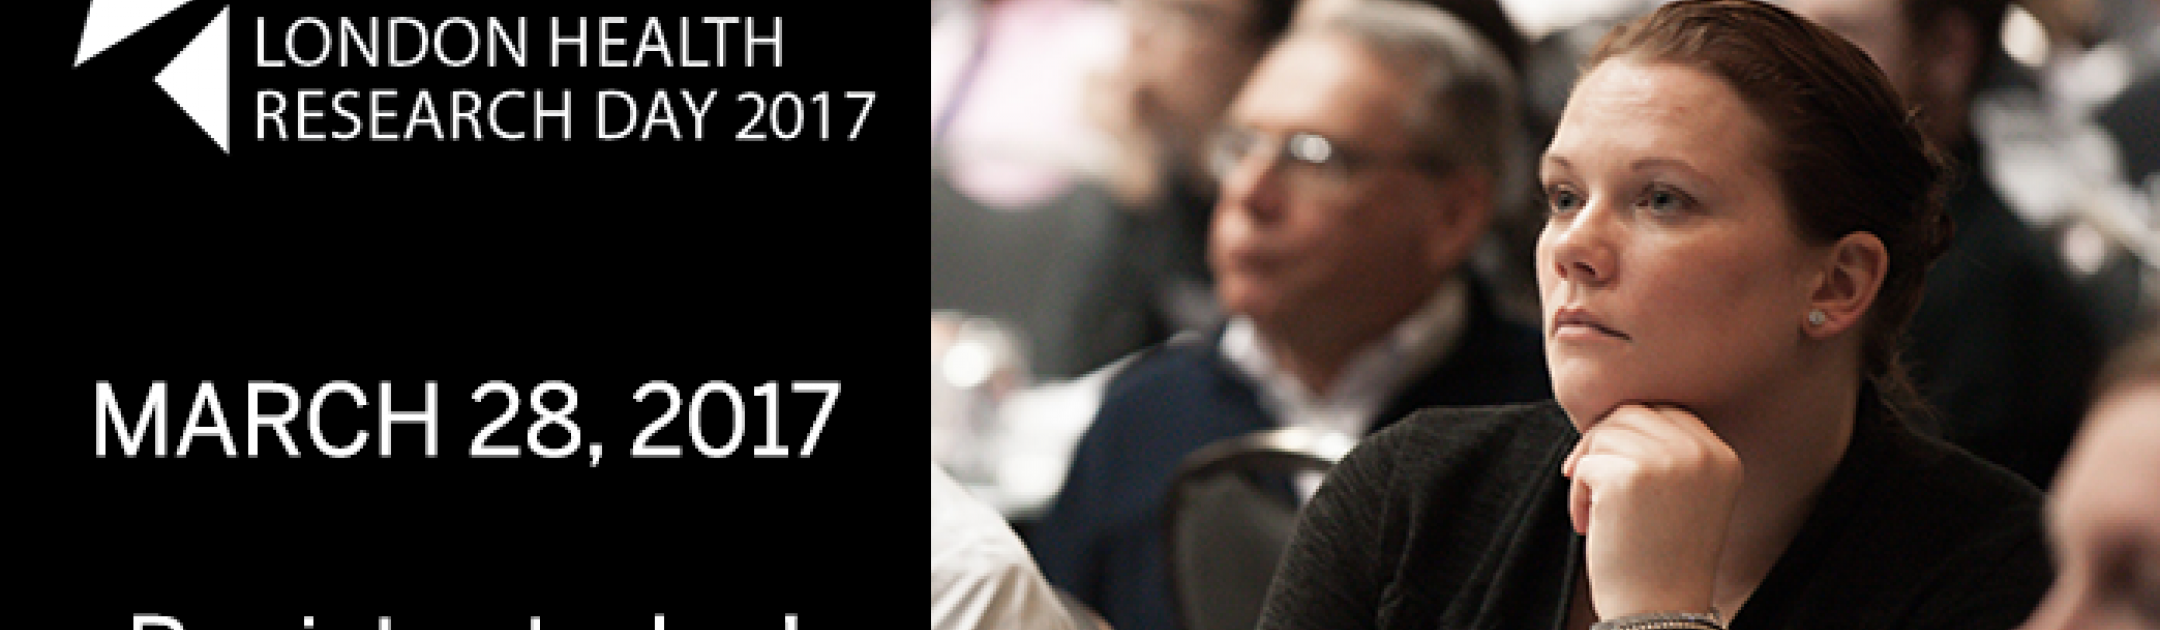 LHRD 2017 on March 28: Register today